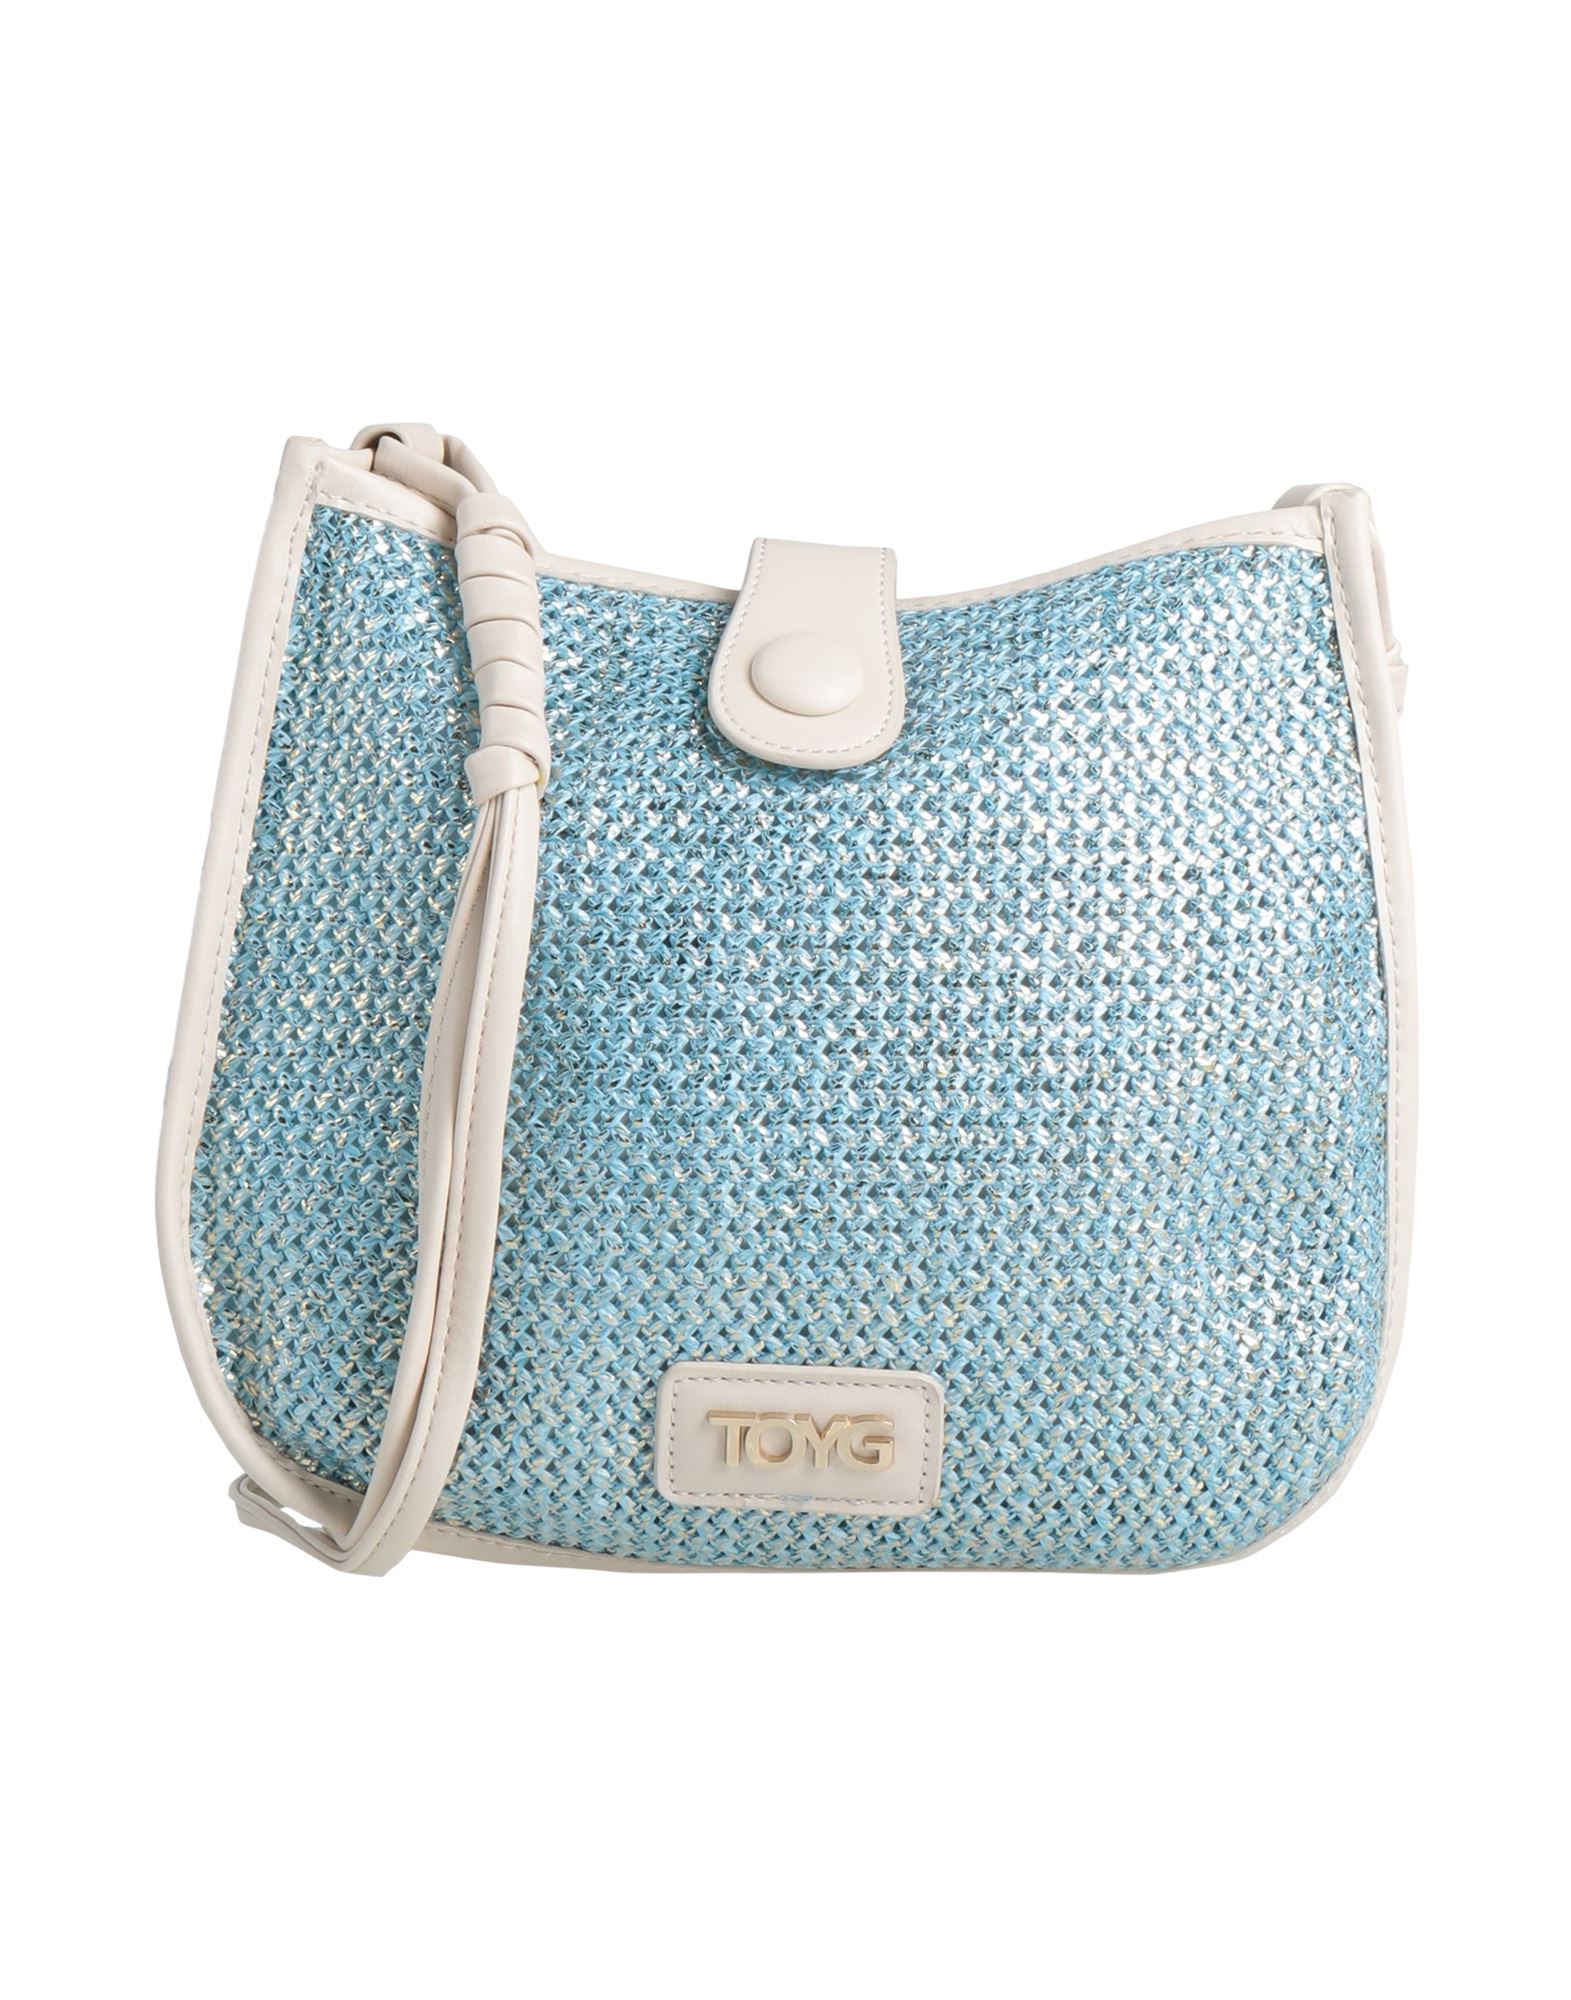 Toy G. Handbags In Turquoise